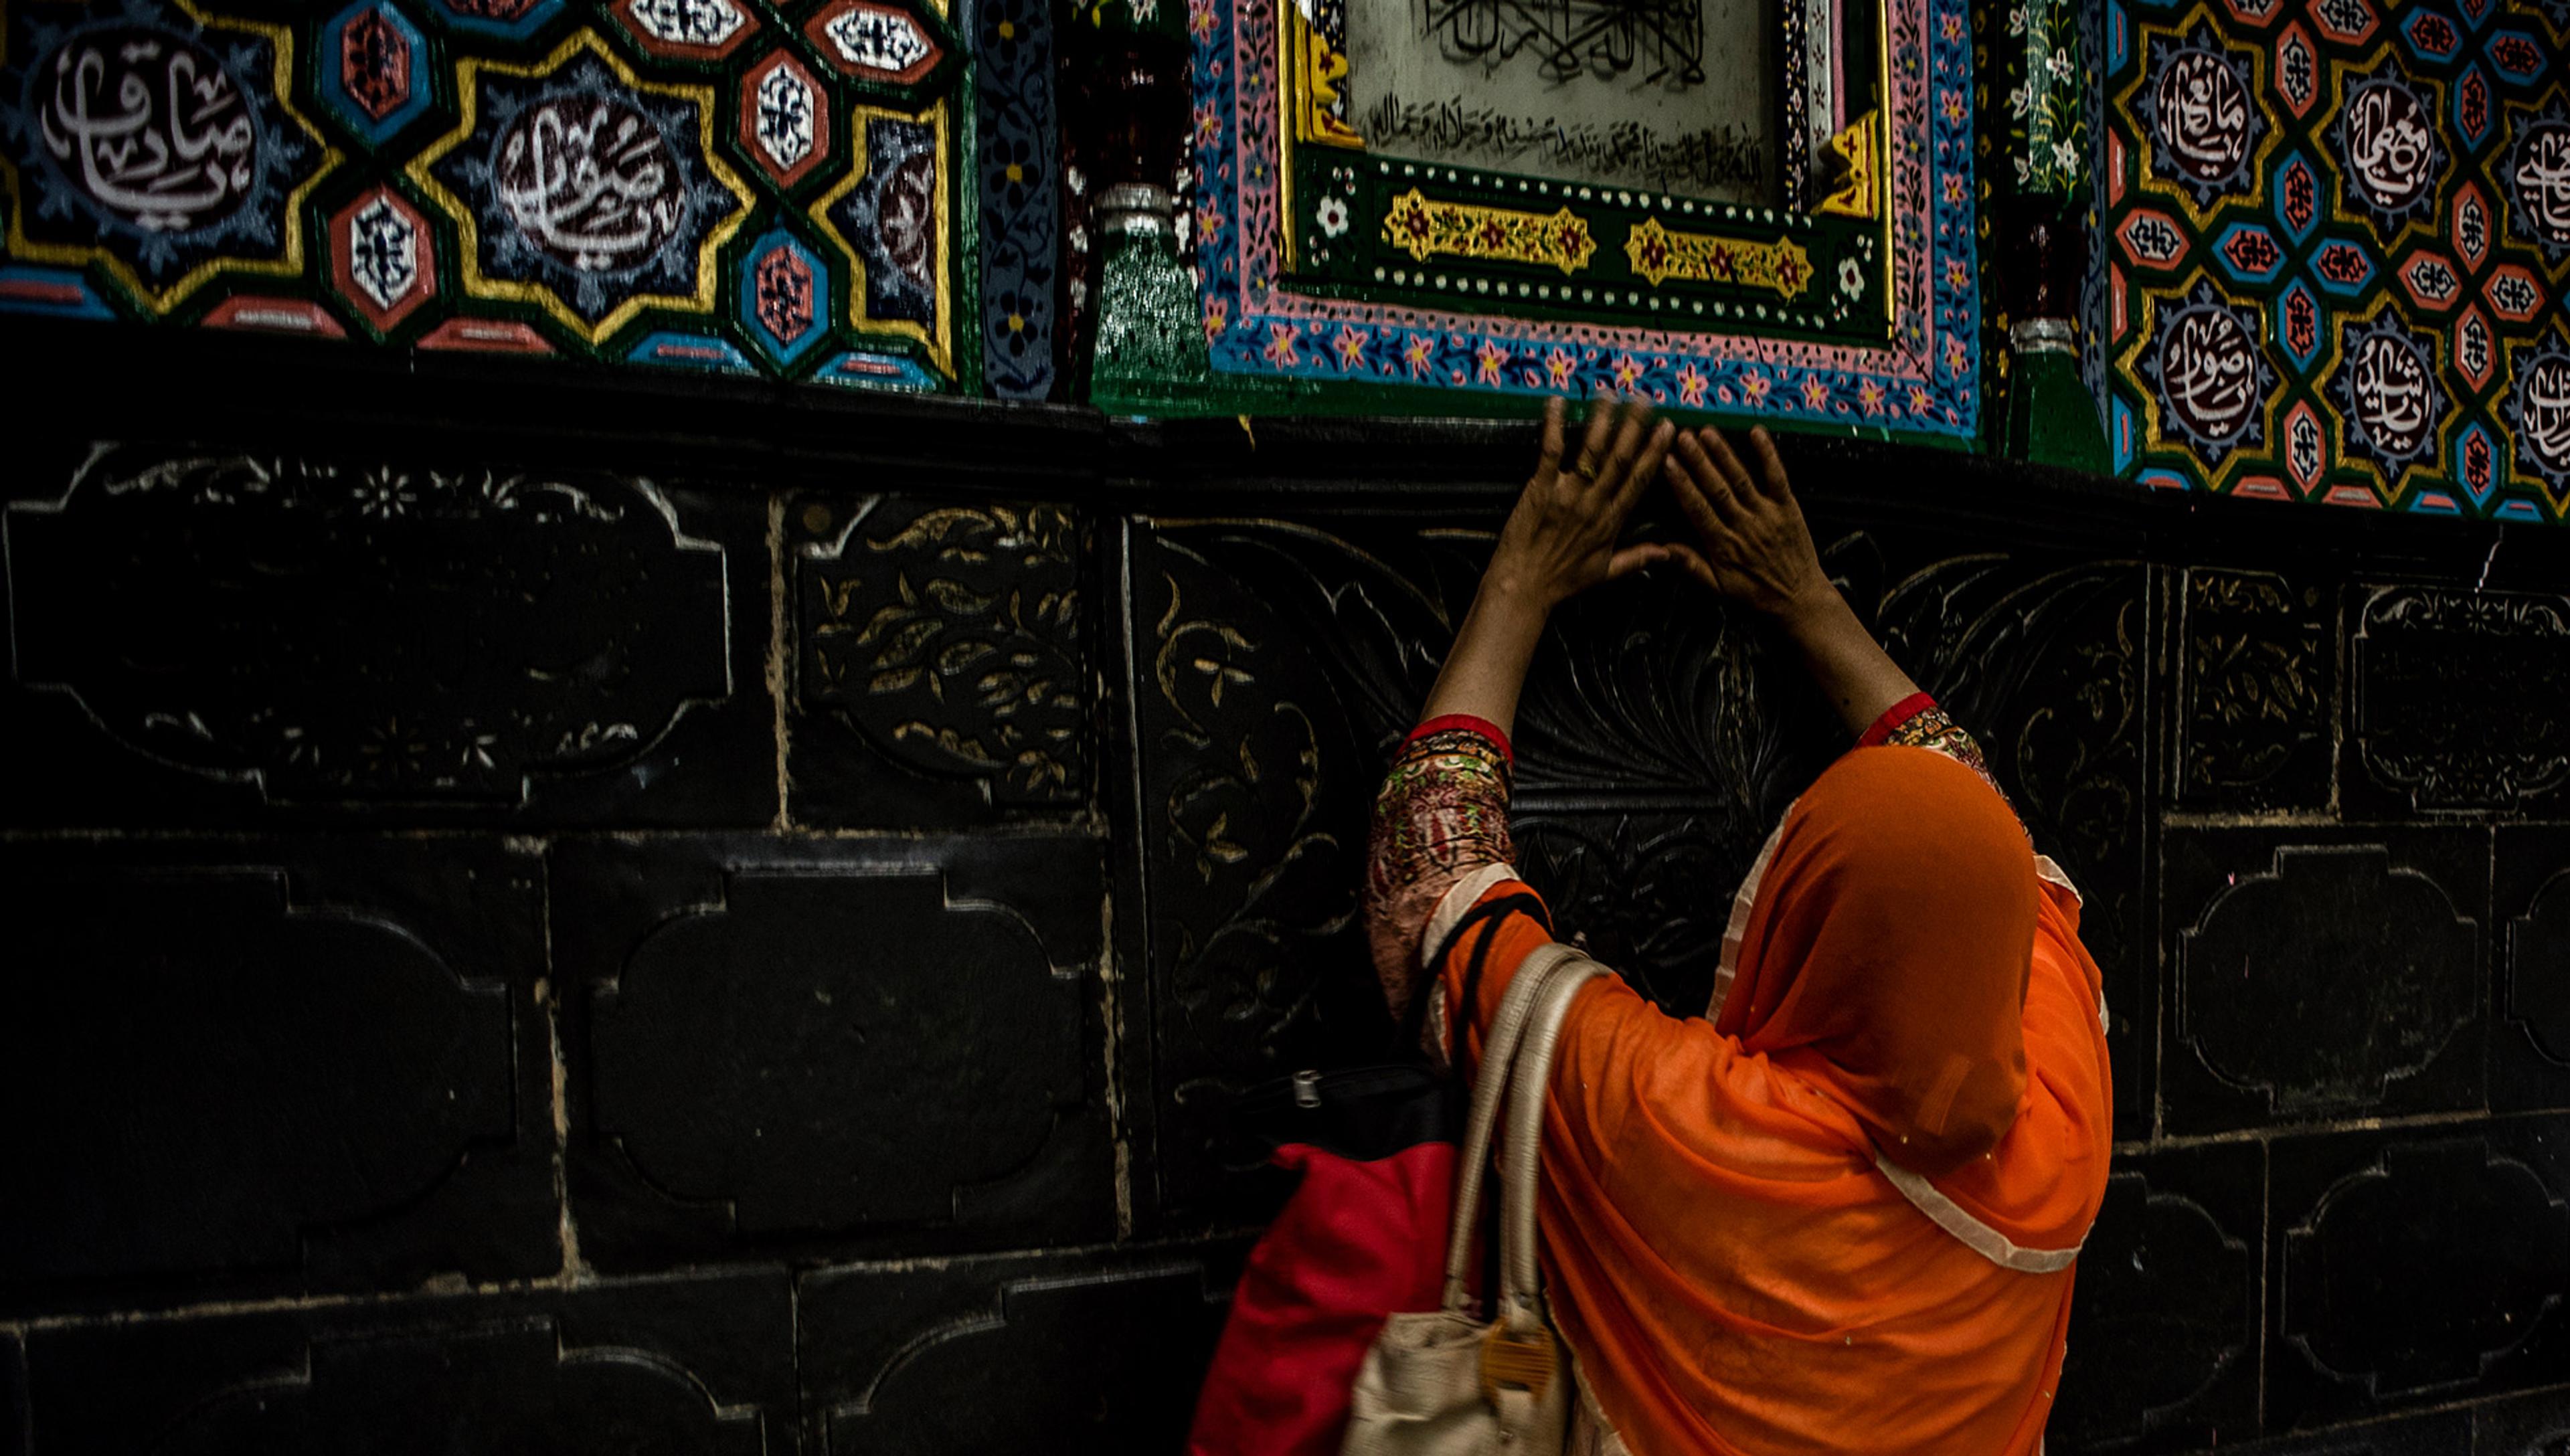 A muslim woman in a colourful orange sari reaches up to touch a decorative panel above a shrine